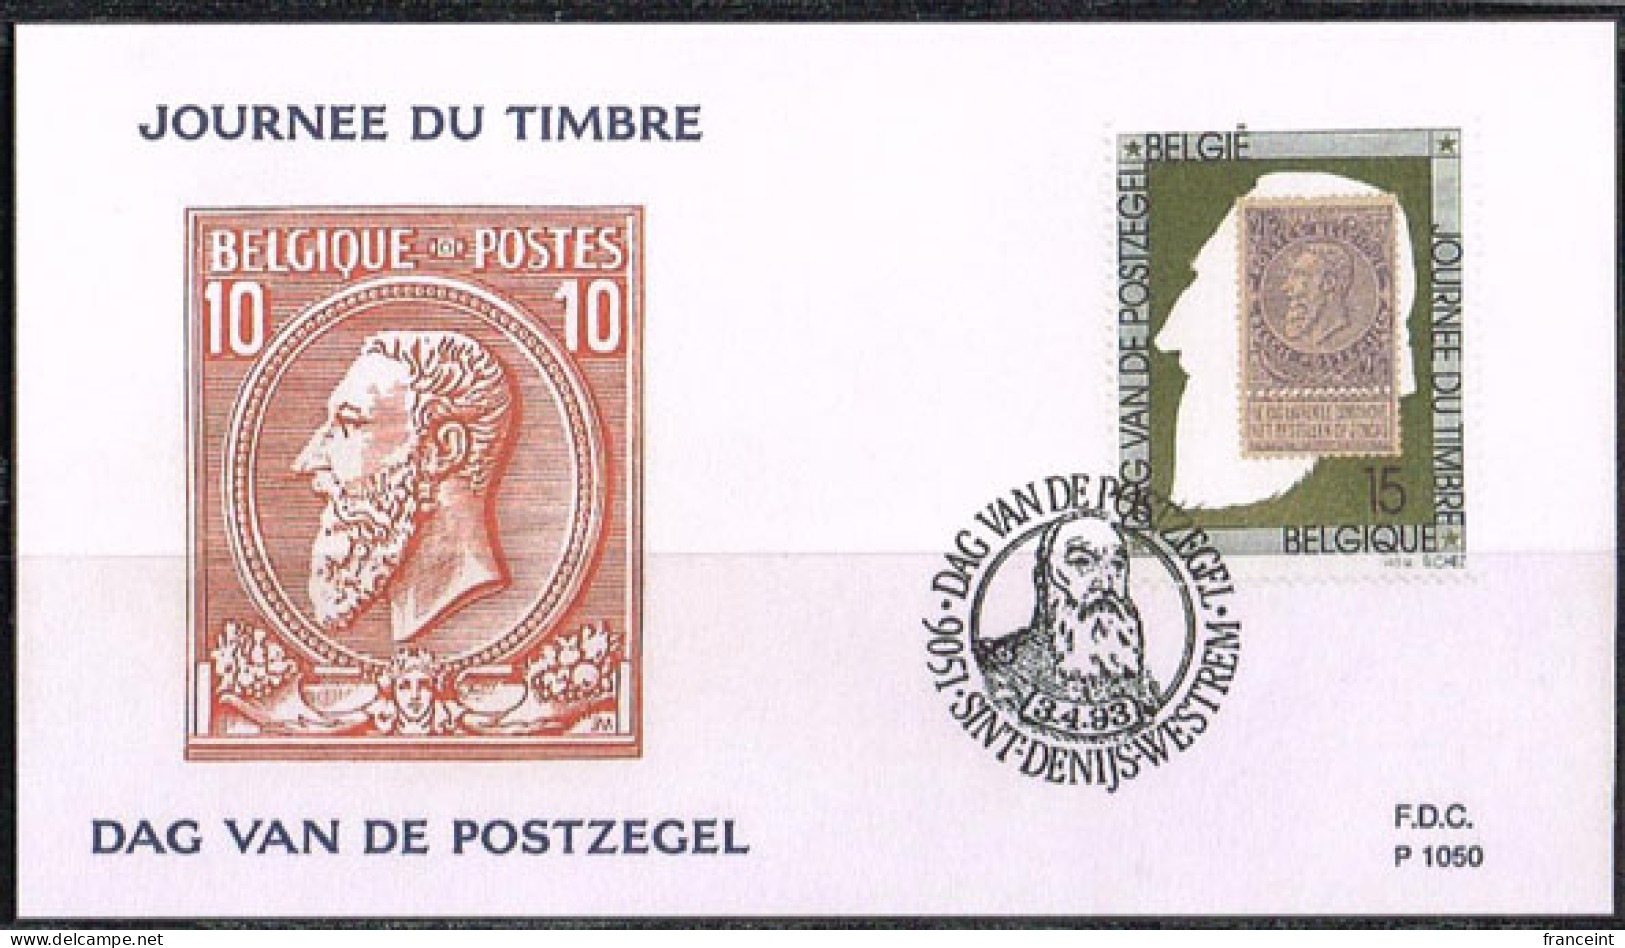 BELGIUM(1993) Old Leopold Stamp. Die Proof In Black Signed By The Engraver, Representing The FDC Cachet. Scott 1582 - Essais & Réimpressions